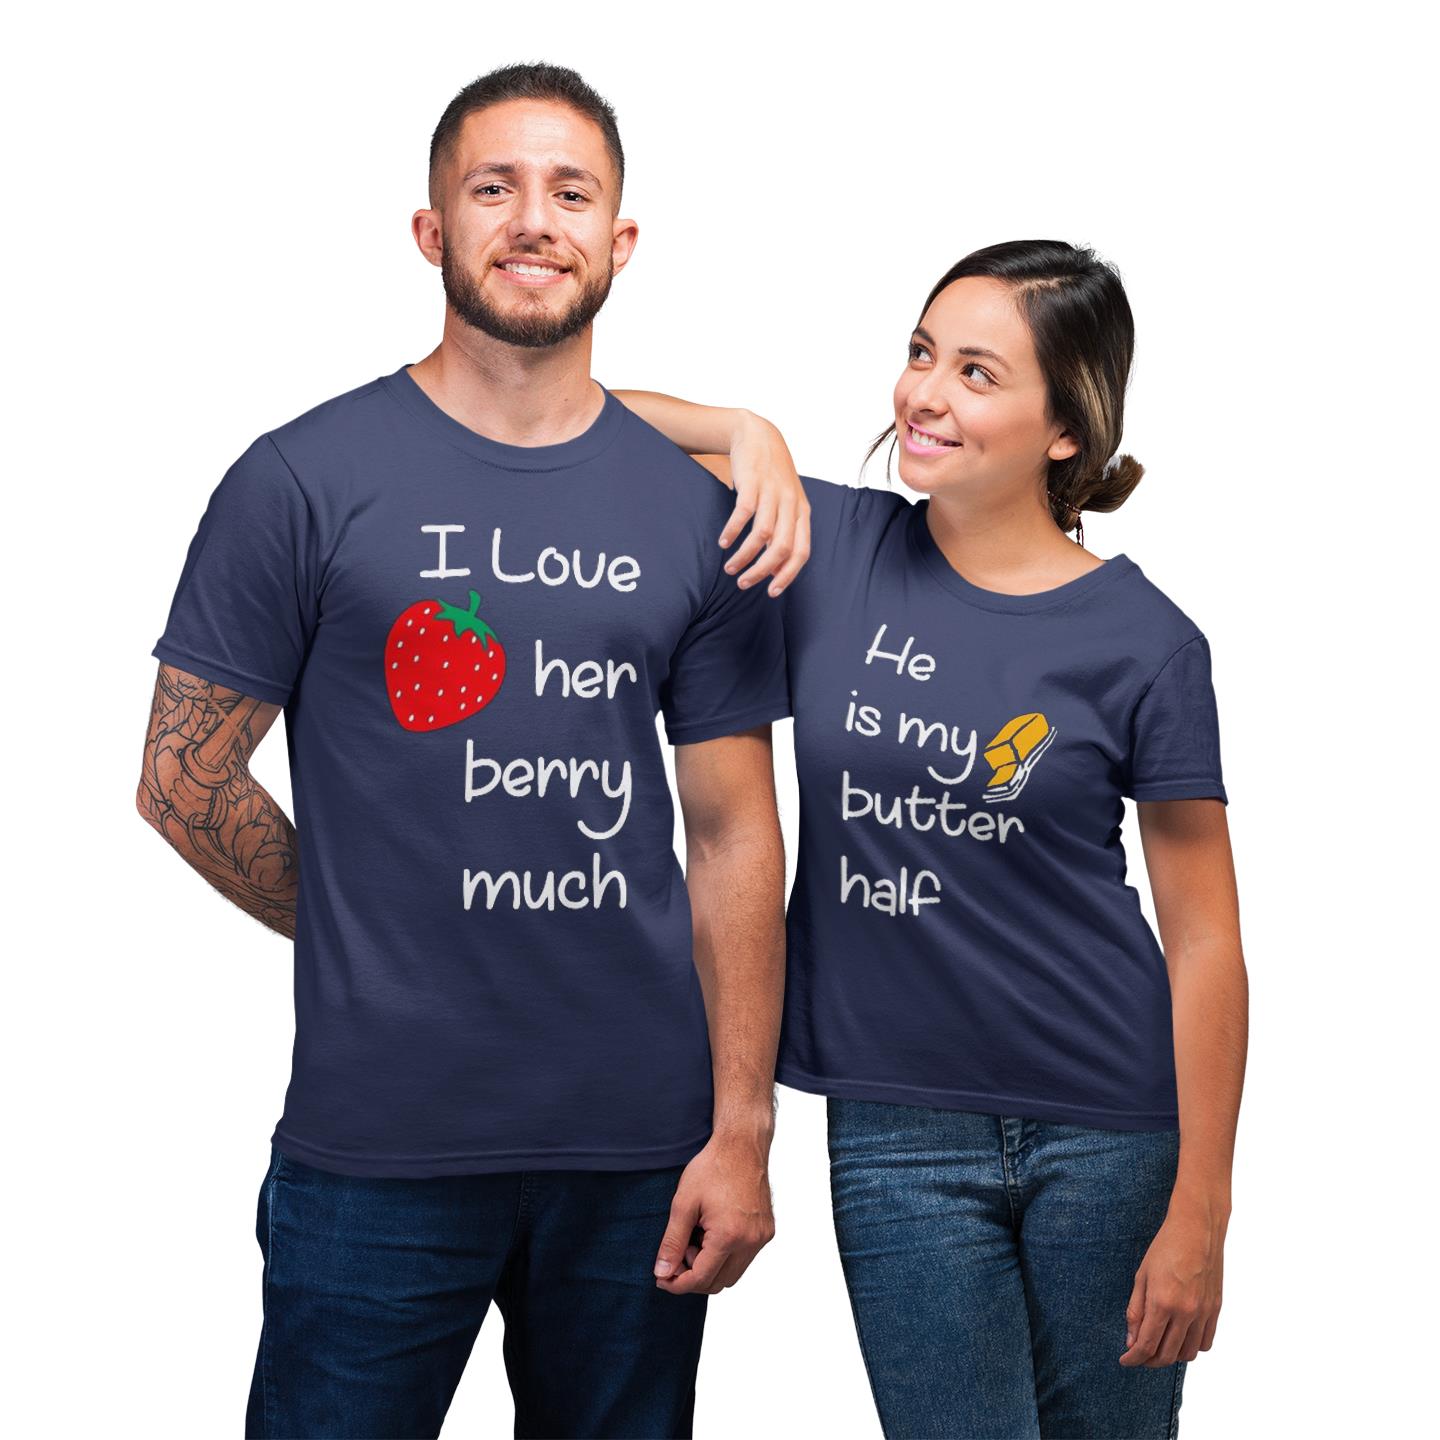 My Butter Half Matching I Lover Her Berry Much For Couple T-shirt